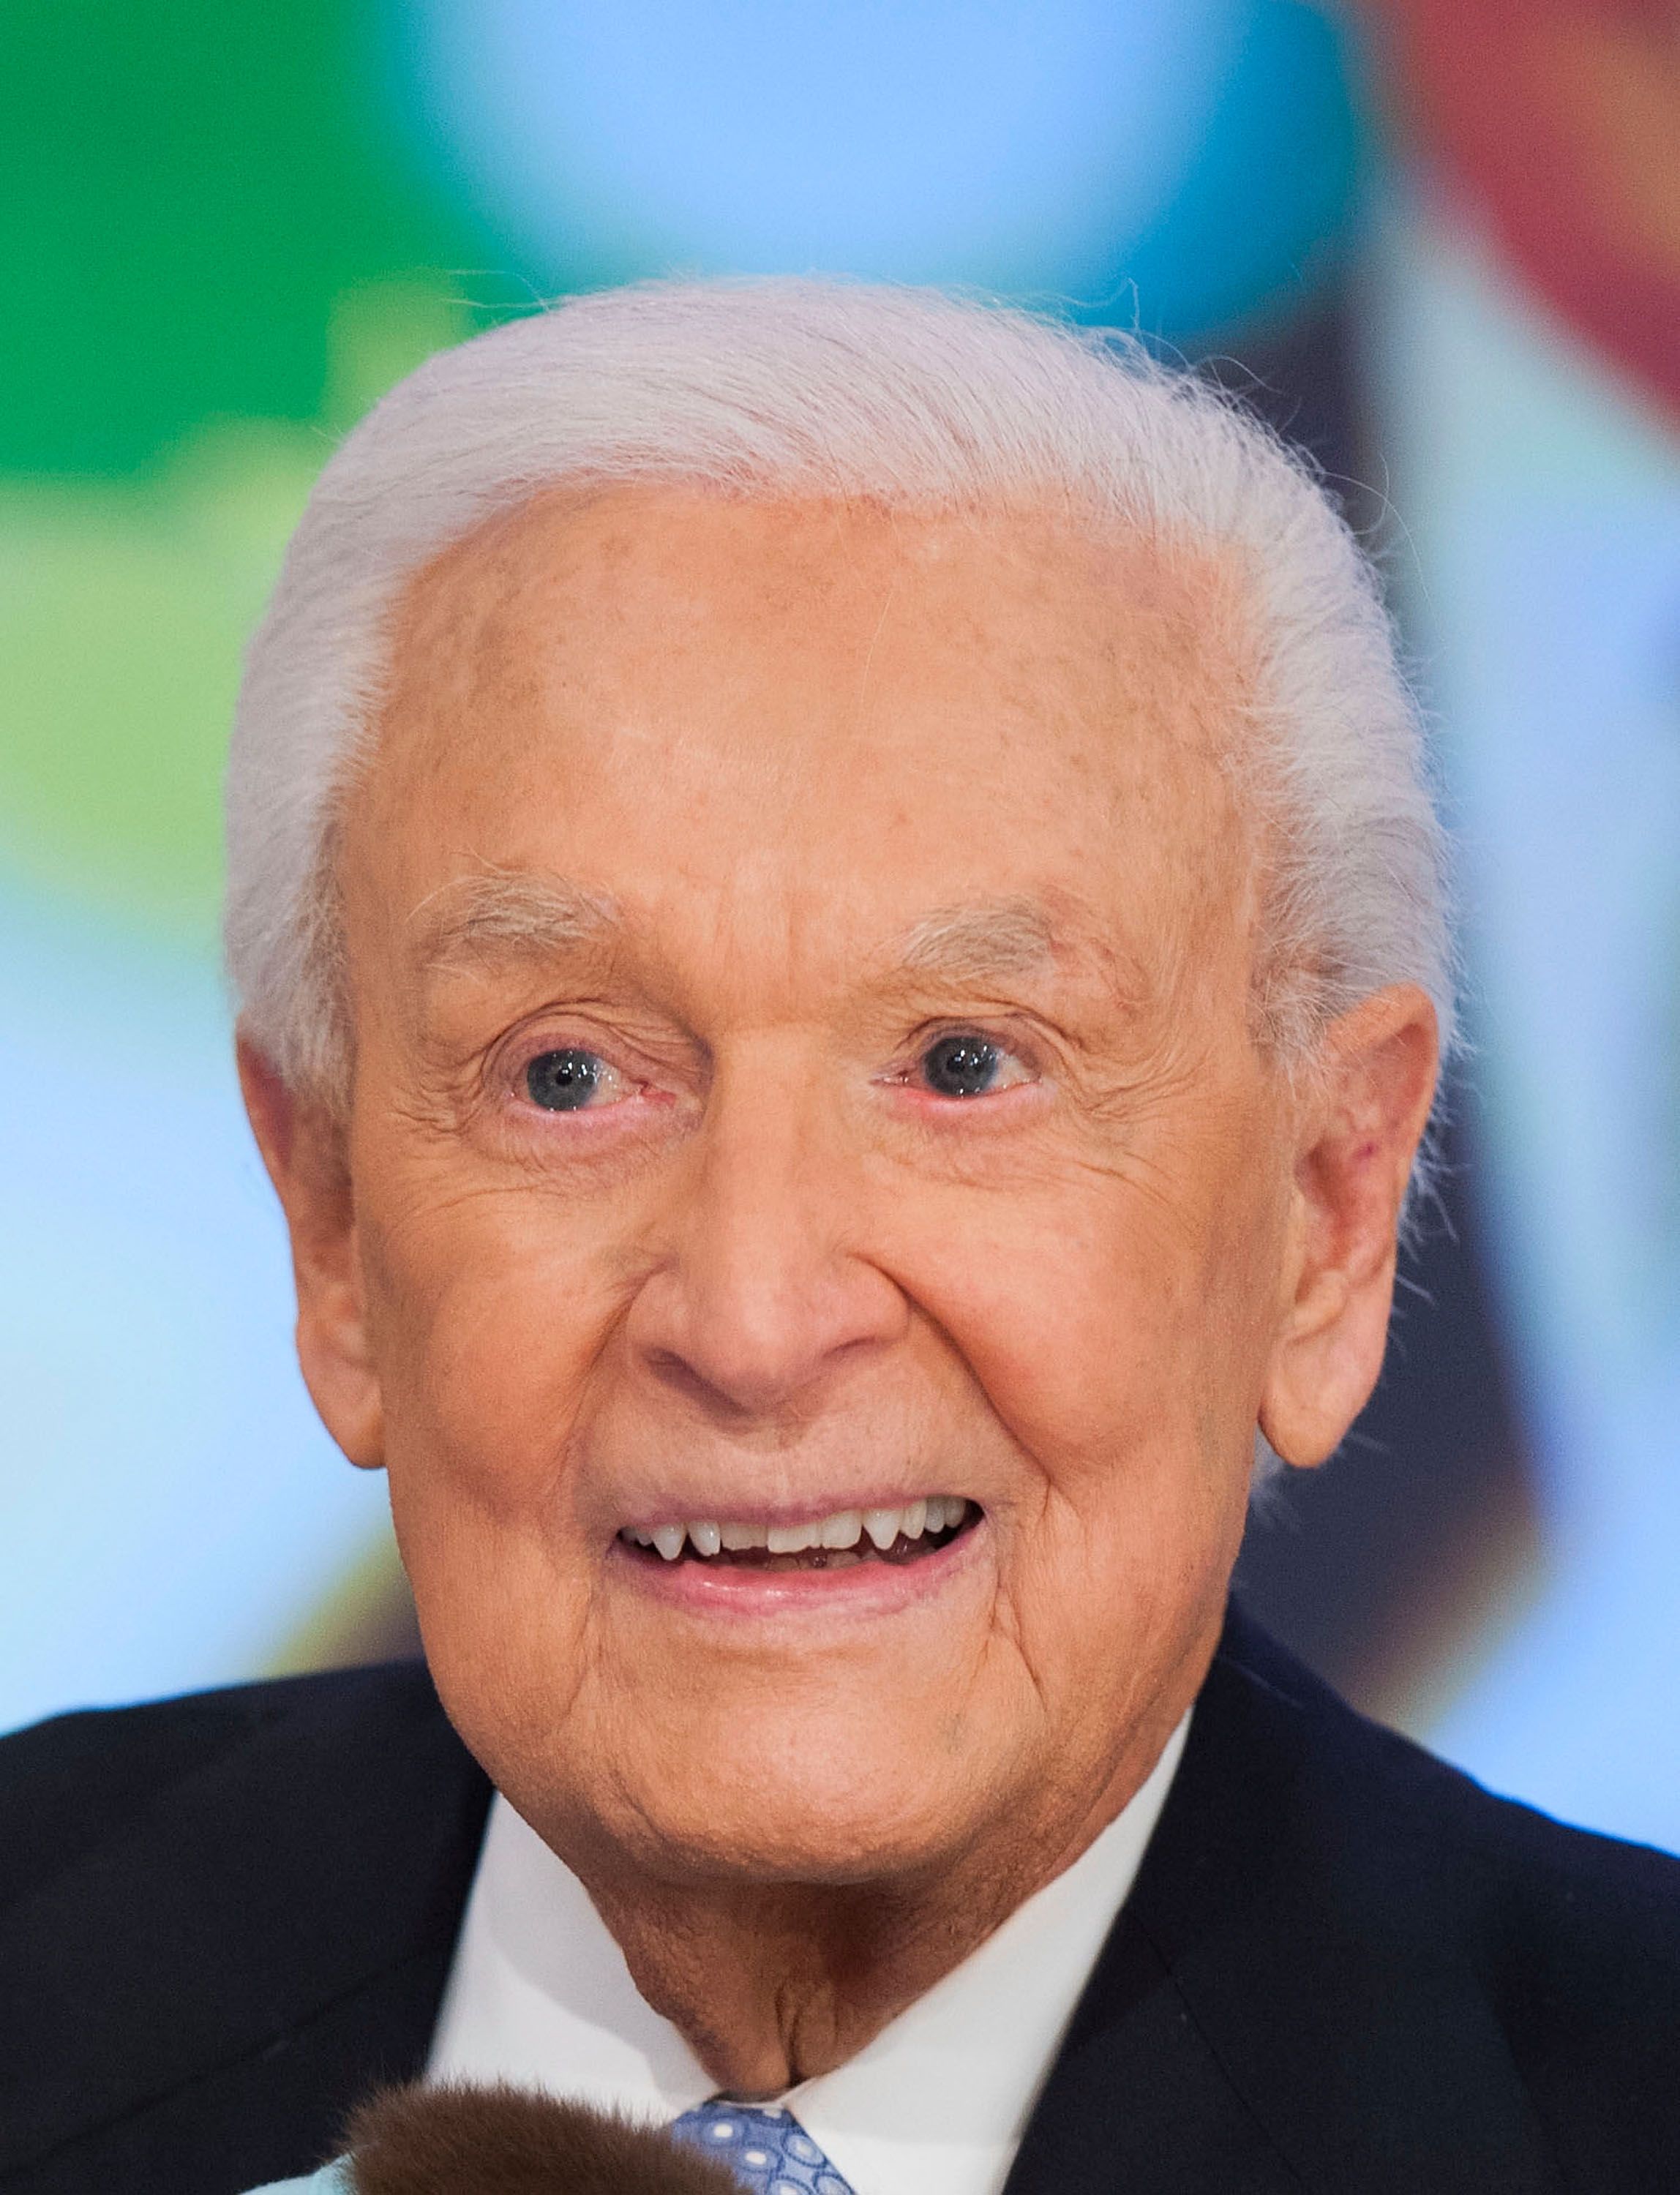 Bob Barker at "The Price Is Right" celebrating his 90th birthday at CBS Television City on November 5, 2013, in Los Angeles, California | Source: Getty Images